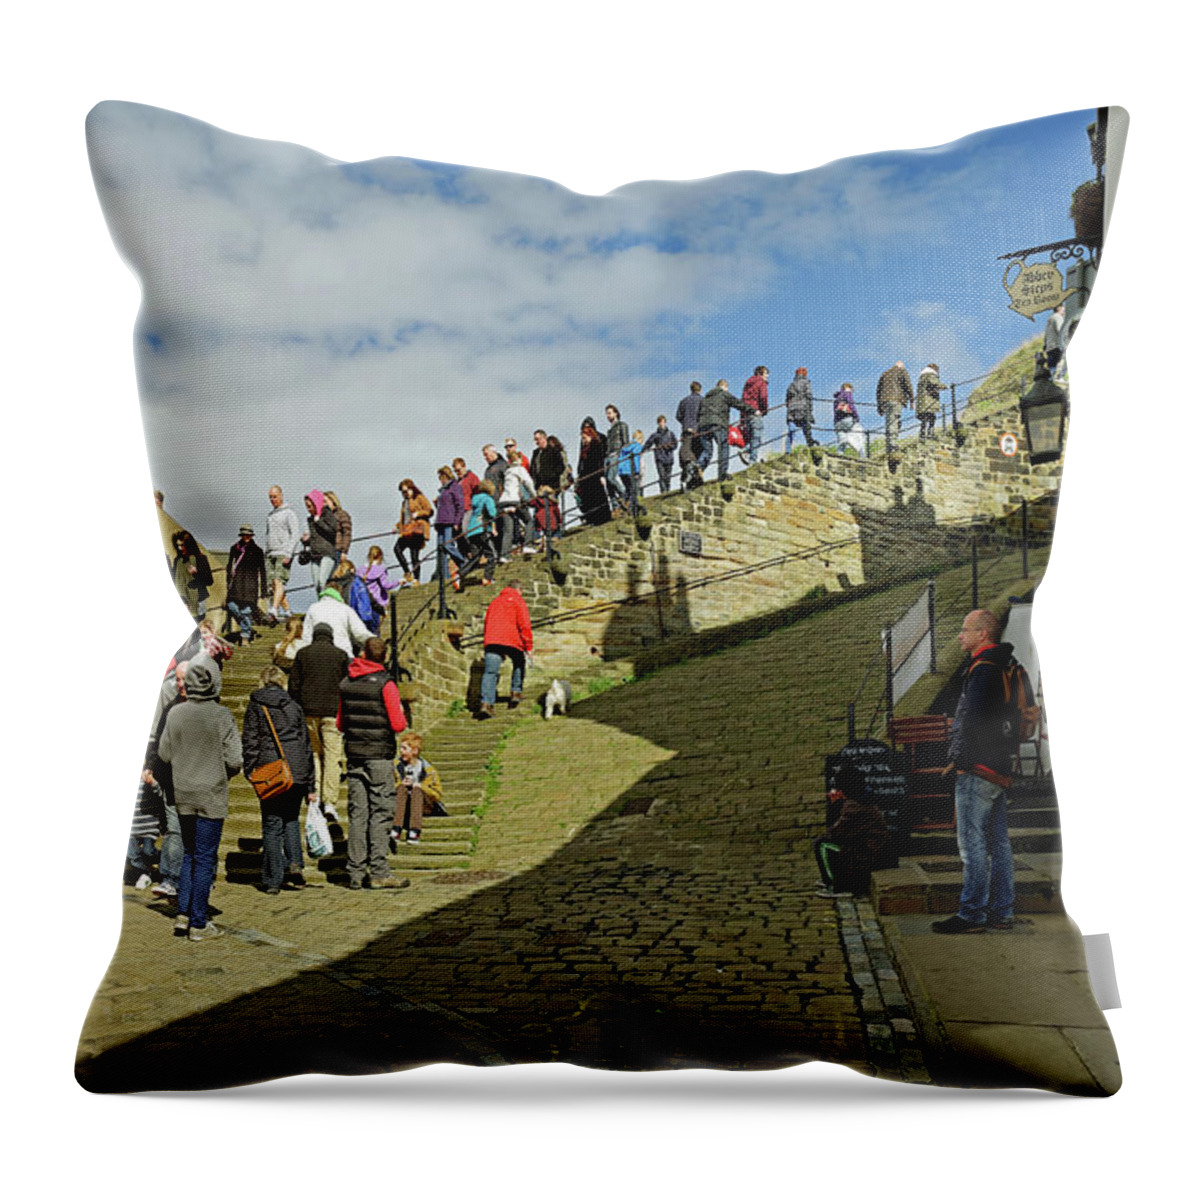 Bright Throw Pillow featuring the photograph Congestion On The Steps, Whitby by Rod Johnson